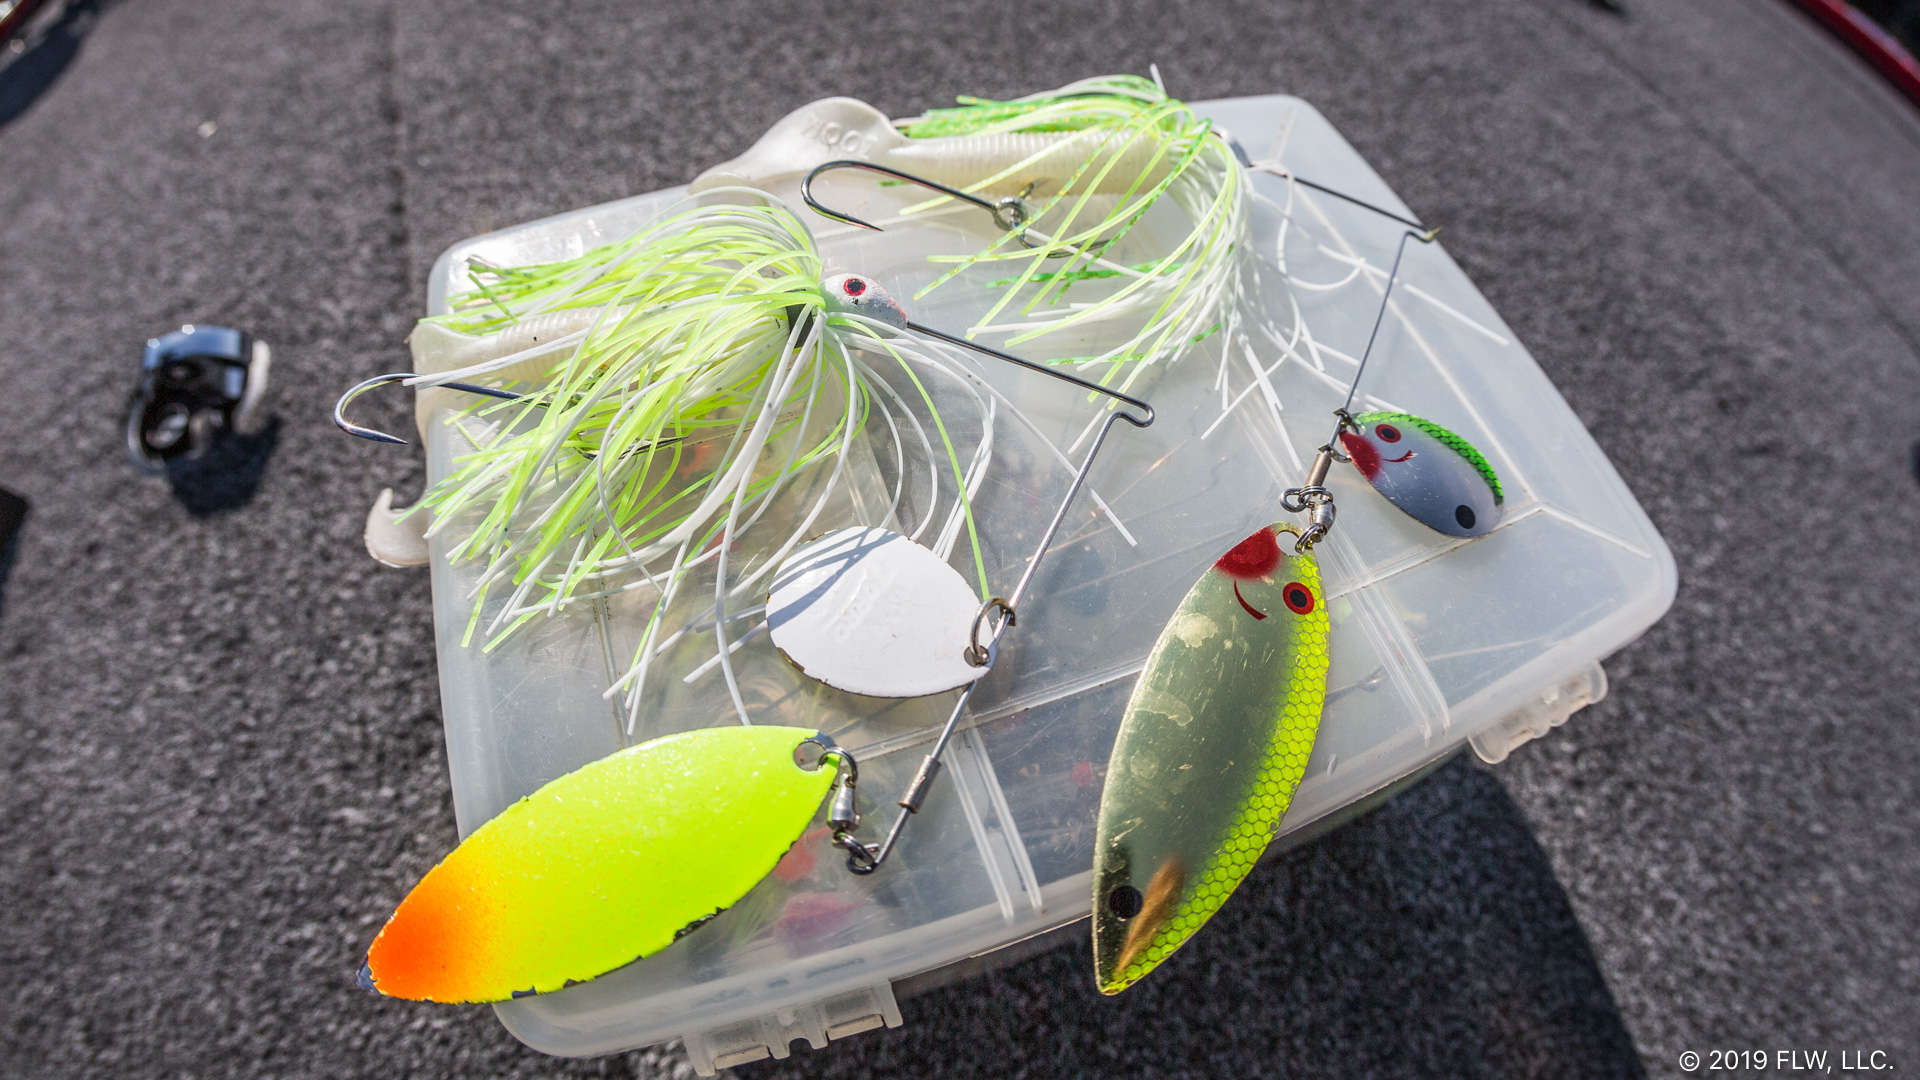 Chatterbait what size 1/4, 3/8, 1/2 - Fishing Tackle - Bass Fishing Forums